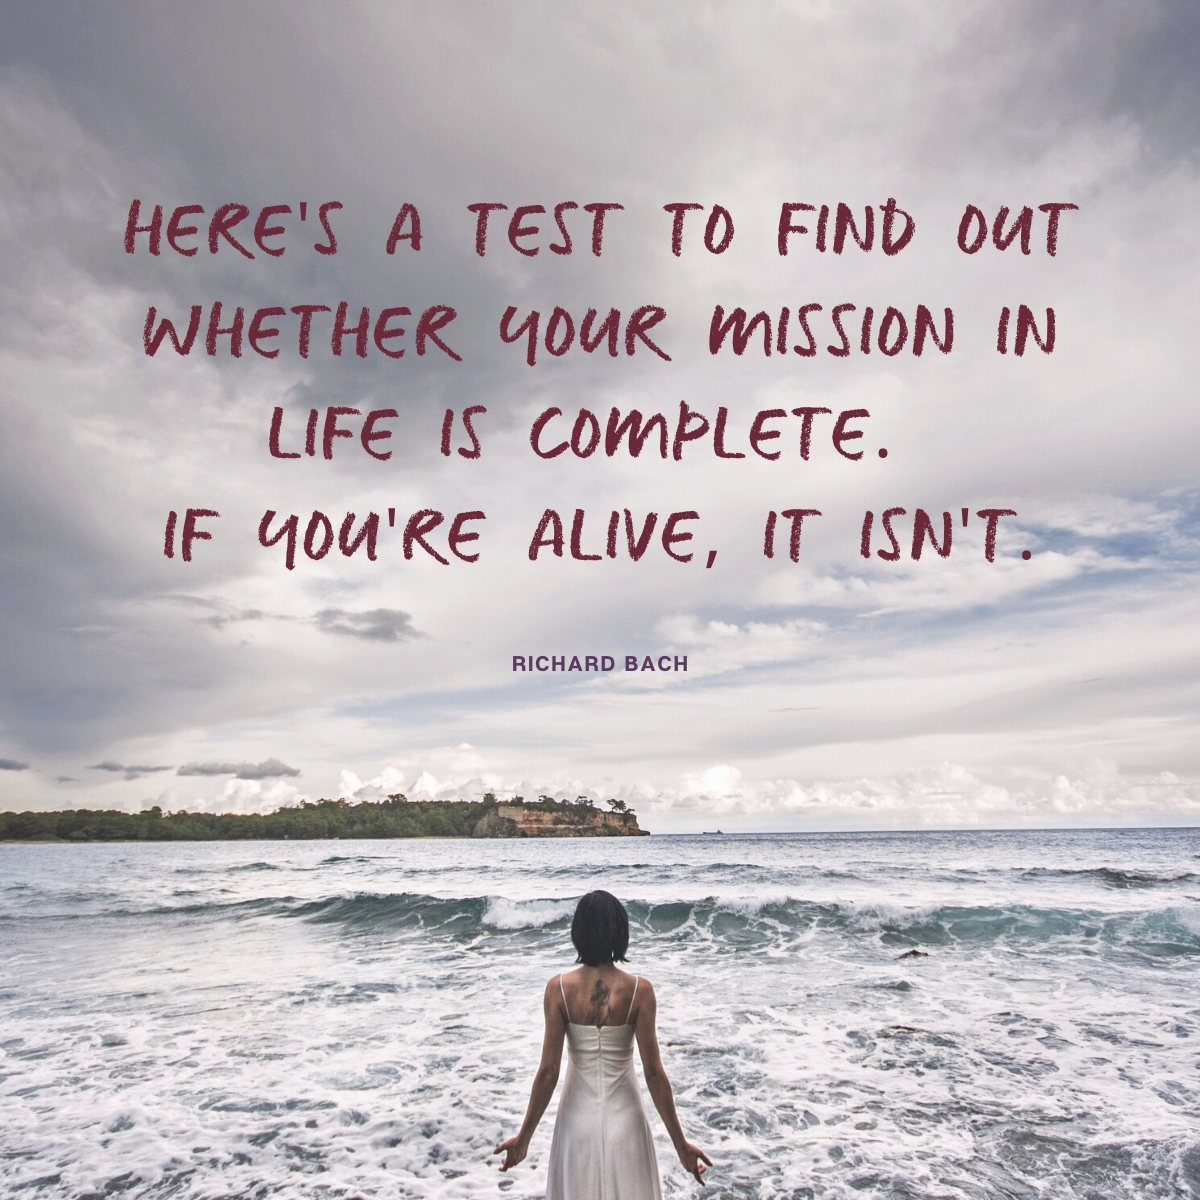 Here's at test to see if your mission in life is complete. If you're alive, it isn't. --Richard Bach